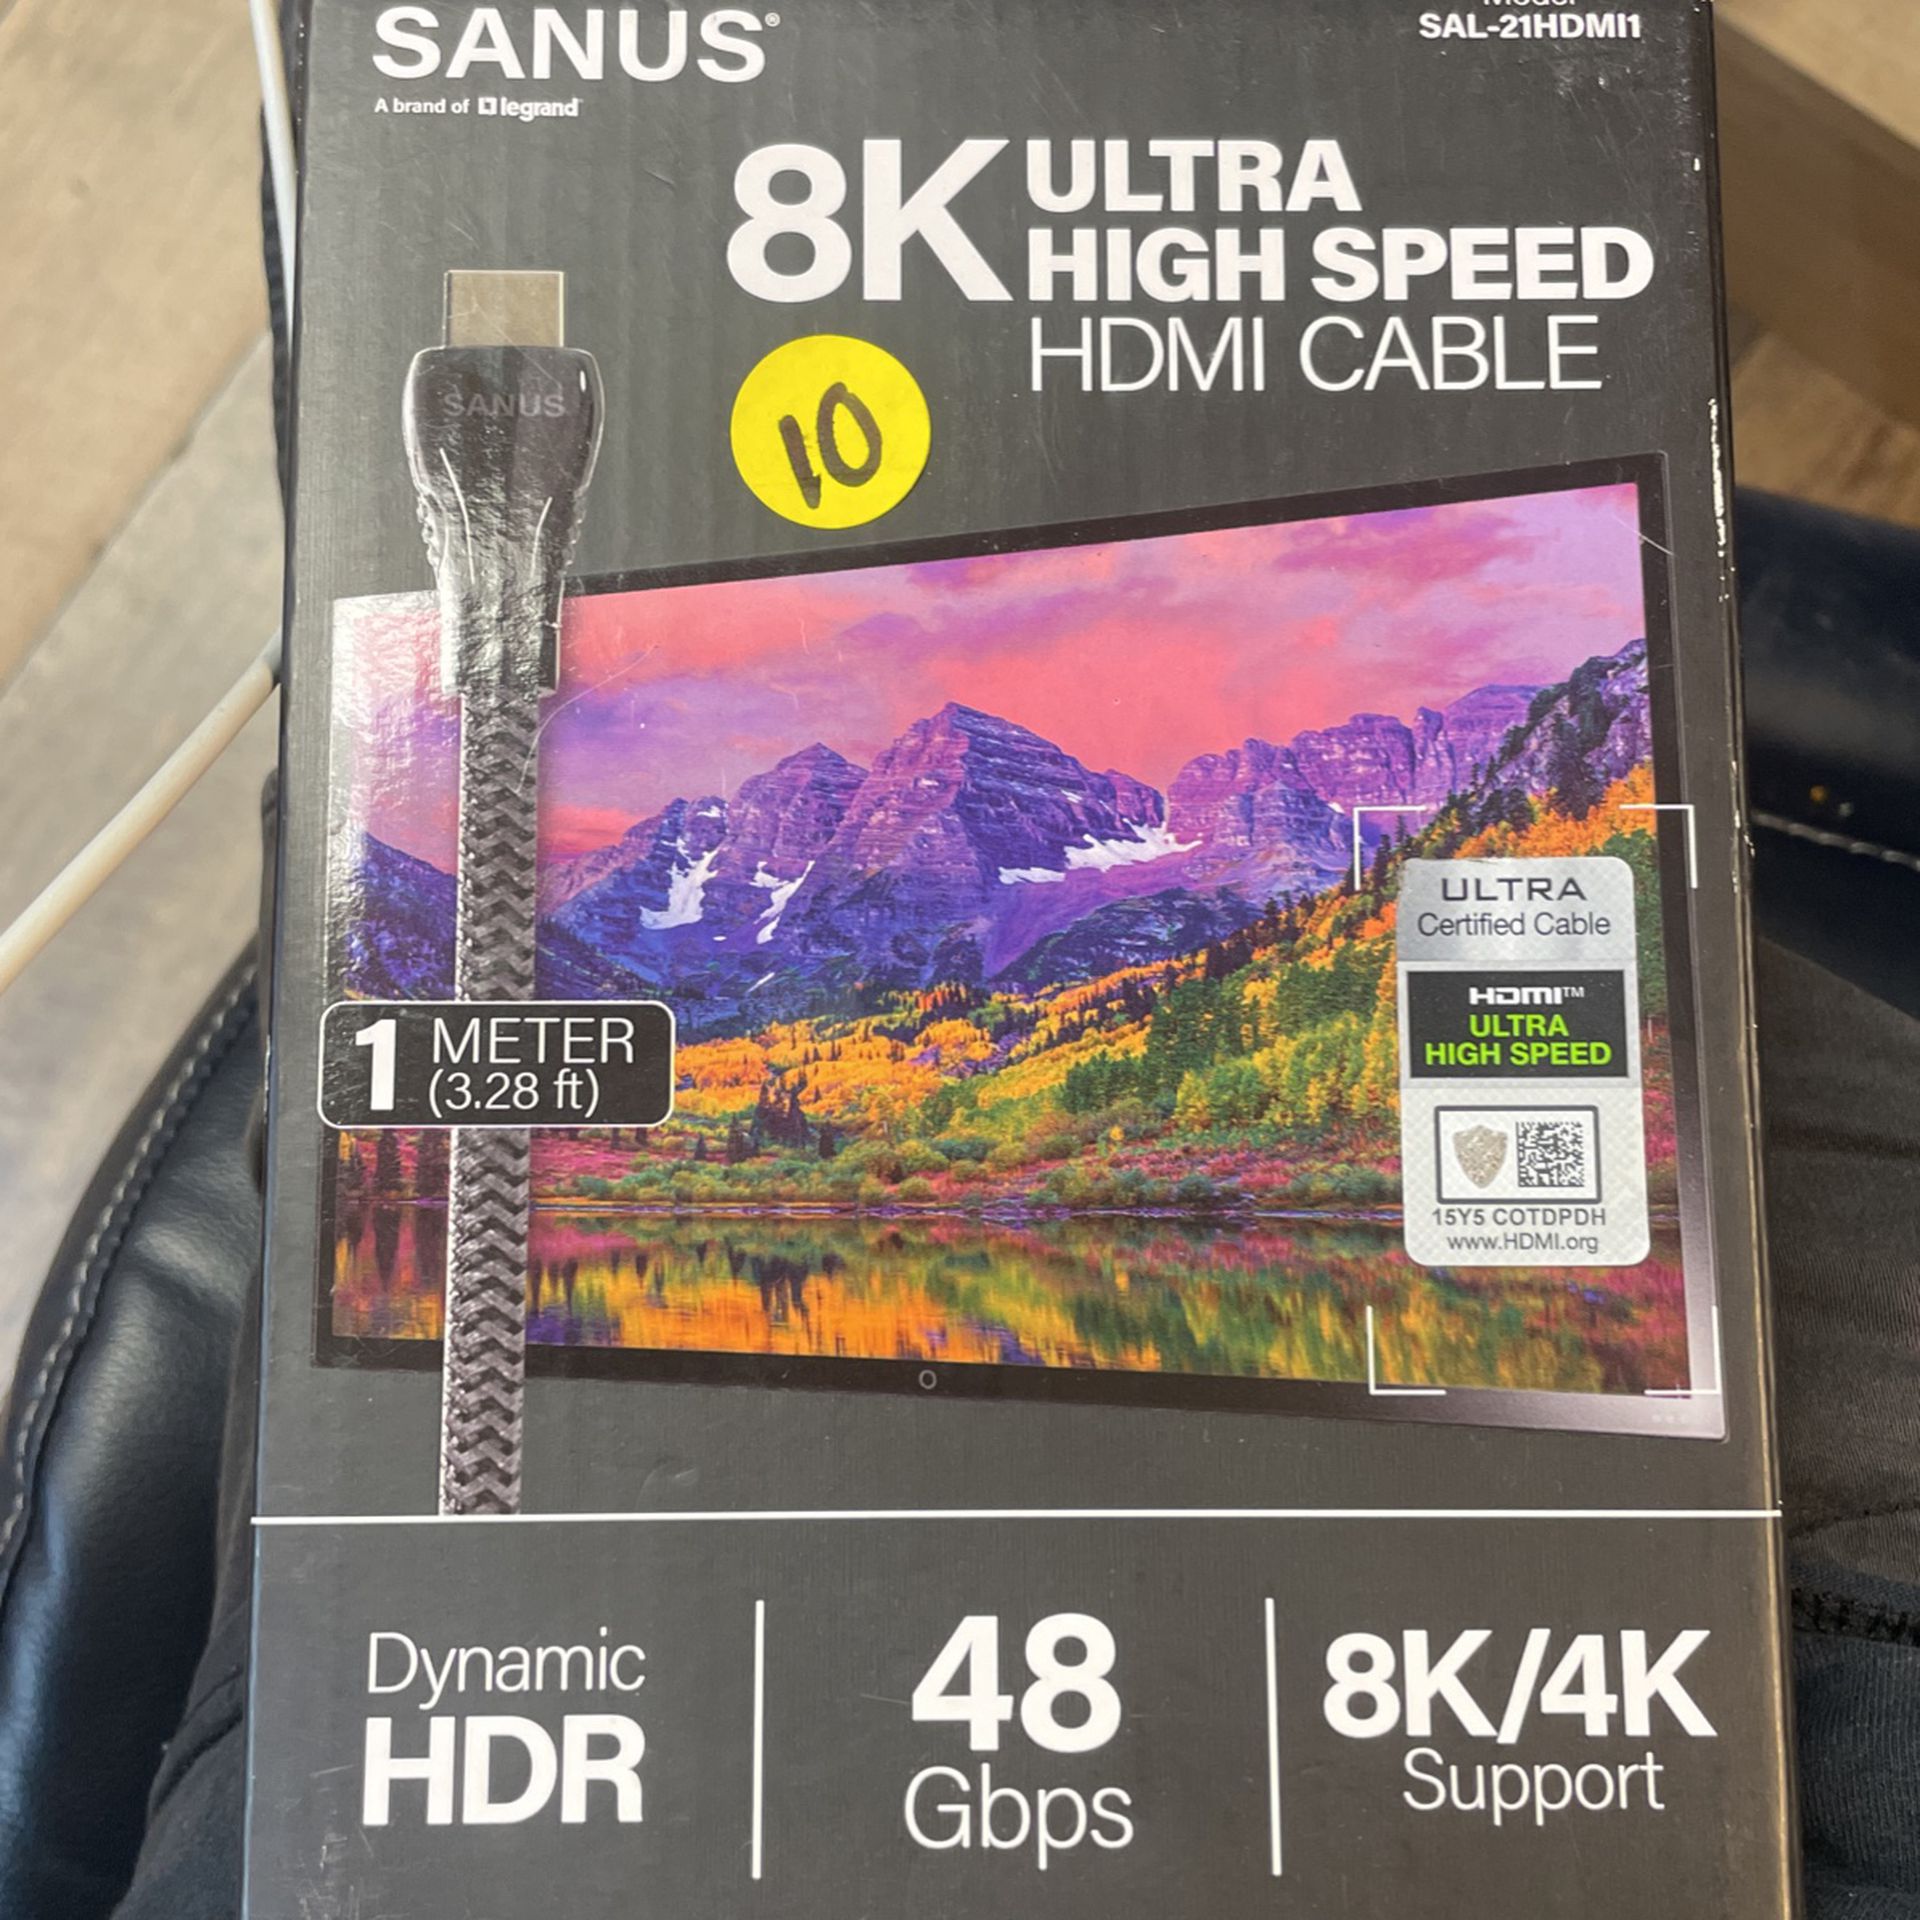 Sanus 8k Ultra High Speed HDMI Cable 